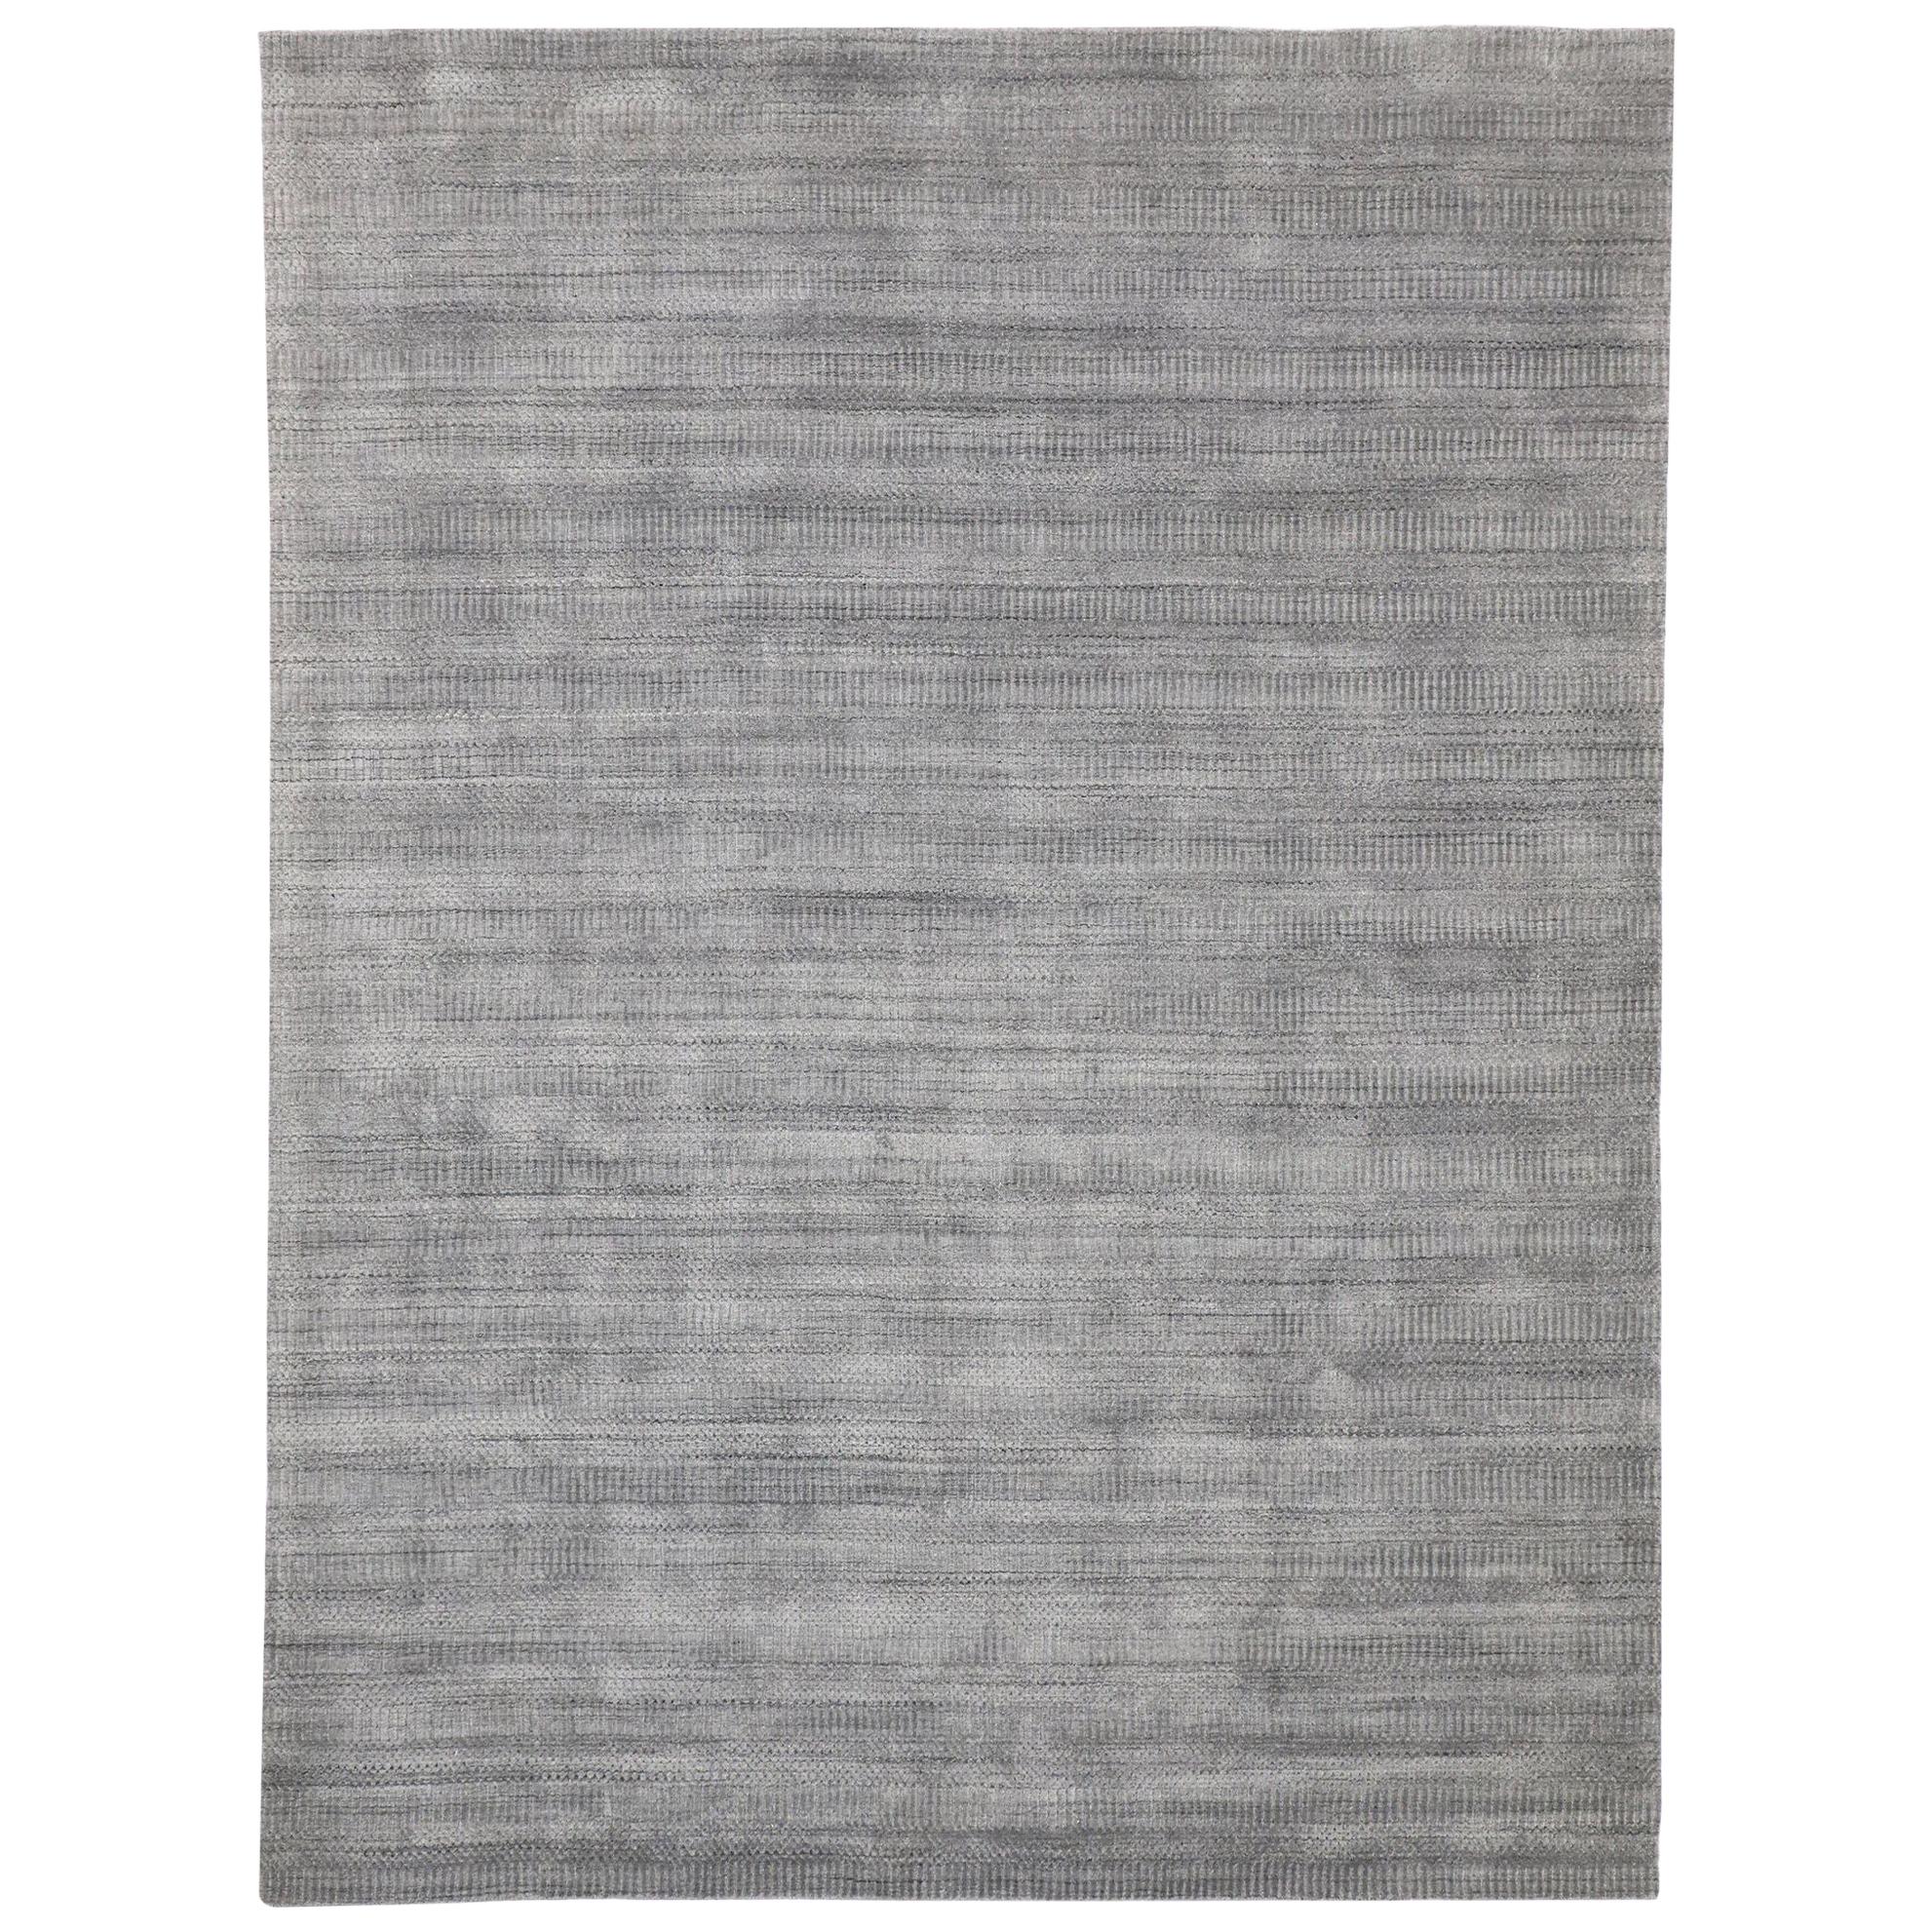 New Transitional Gray Area Rug with Modern Scandinavian Danish Style 